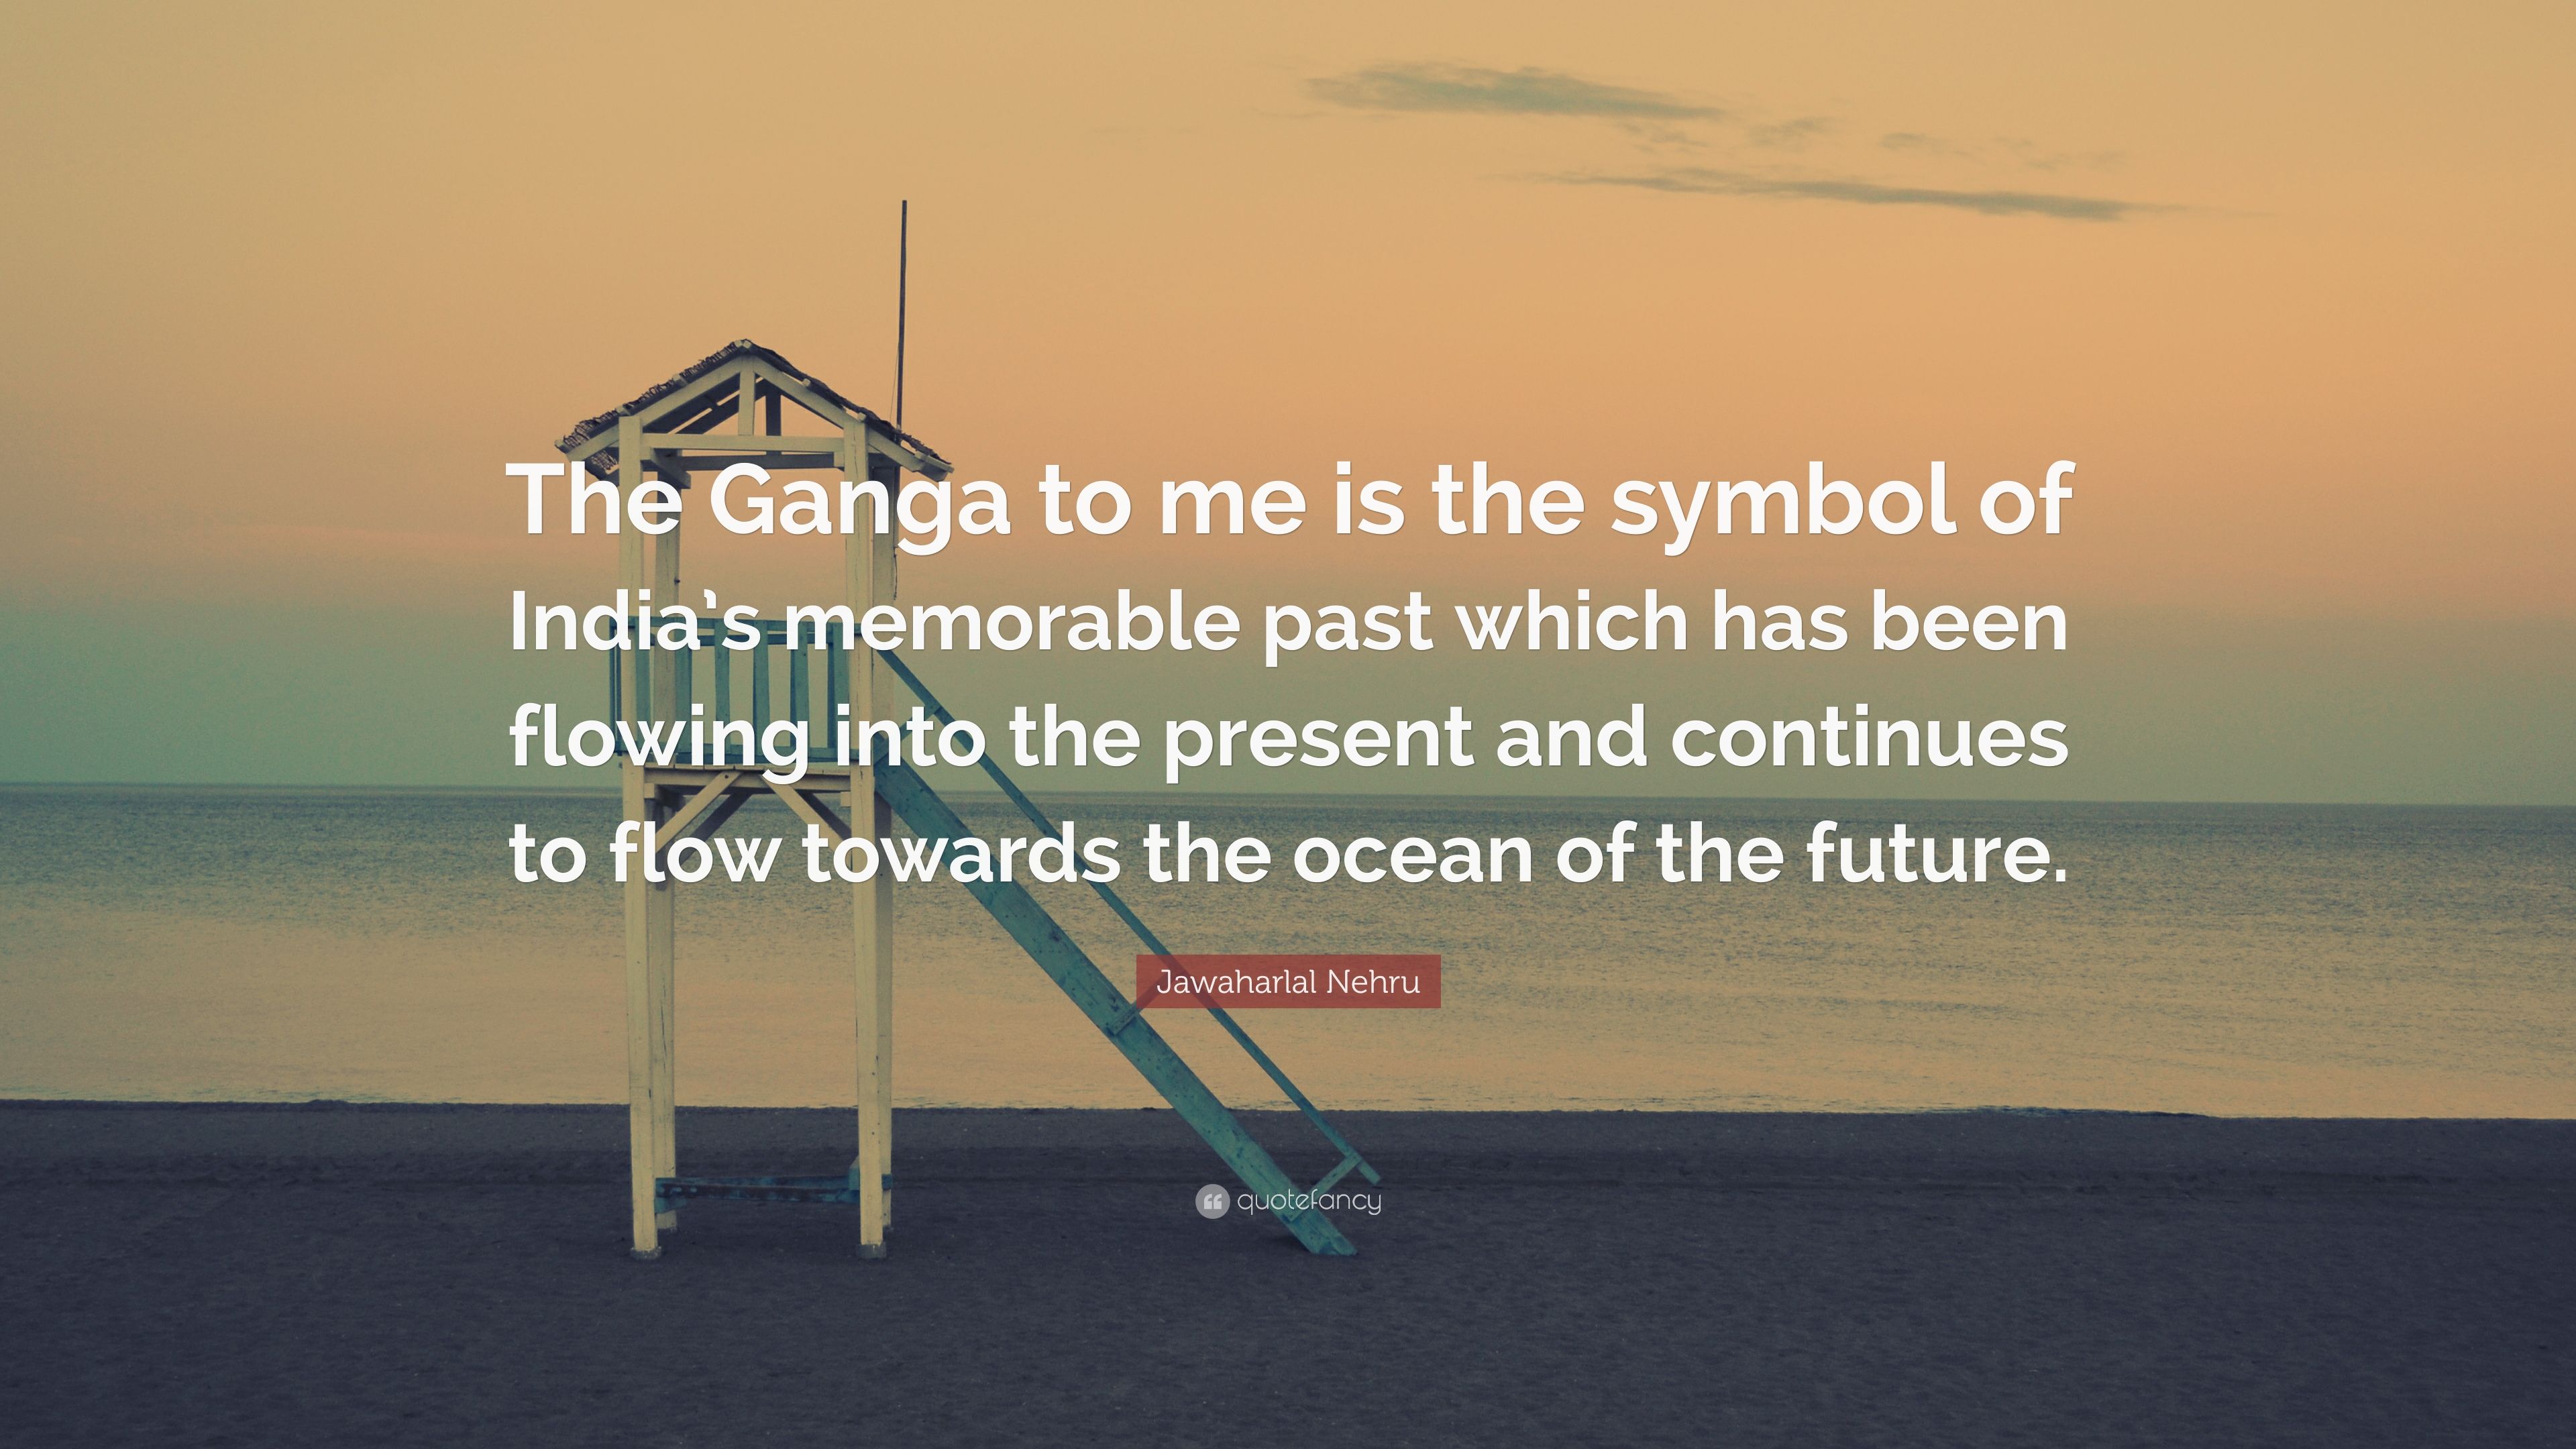 Jawaharlal Nehru Quote: “The Ganga to me is the symbol of India's